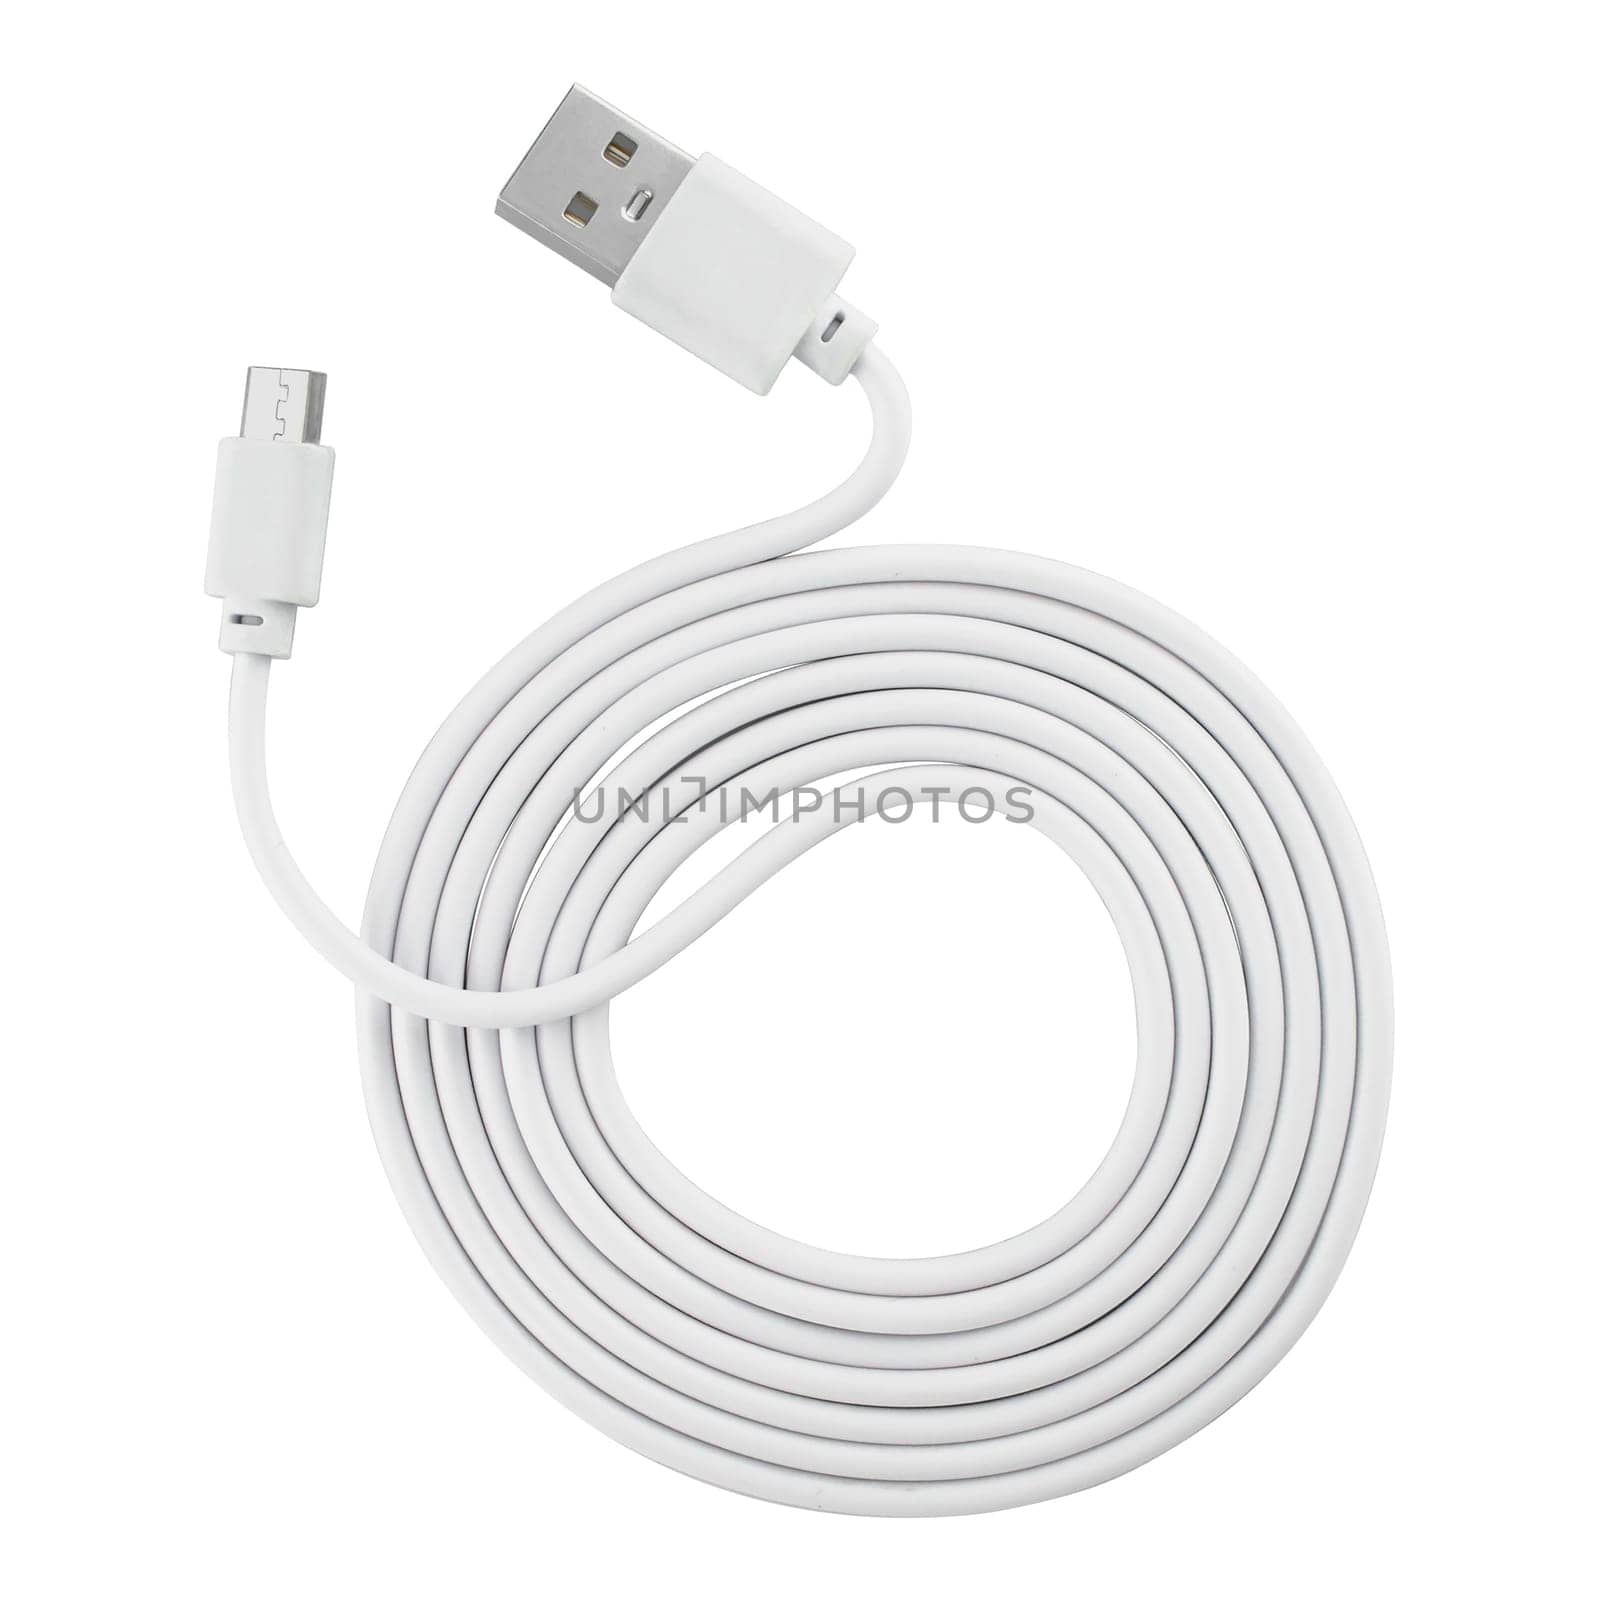 cable with micro USB and USB connectors by A_A